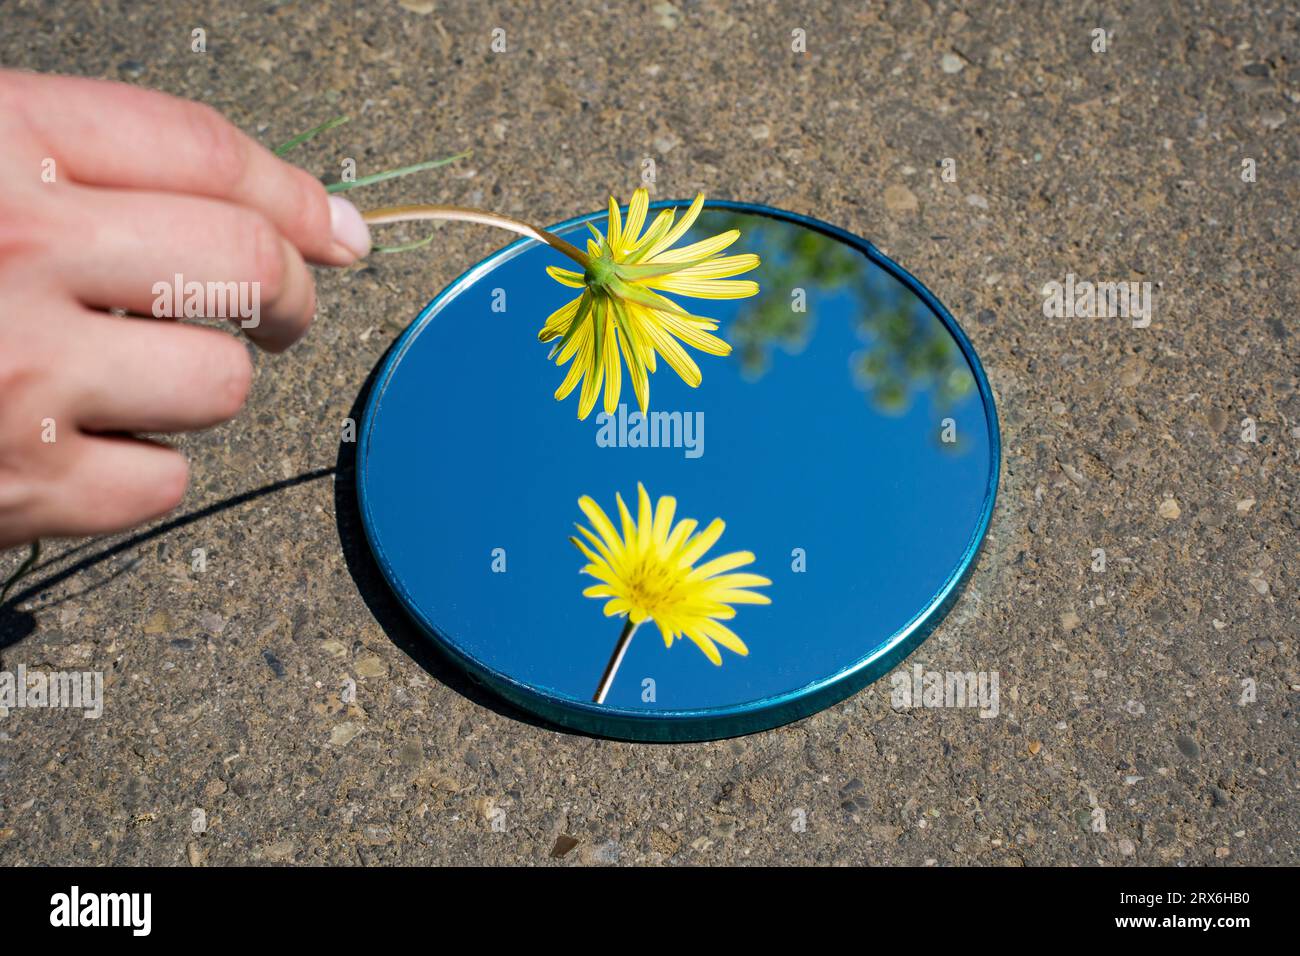 Hand of woman holding yellow flower over mirror on floor Stock Photo